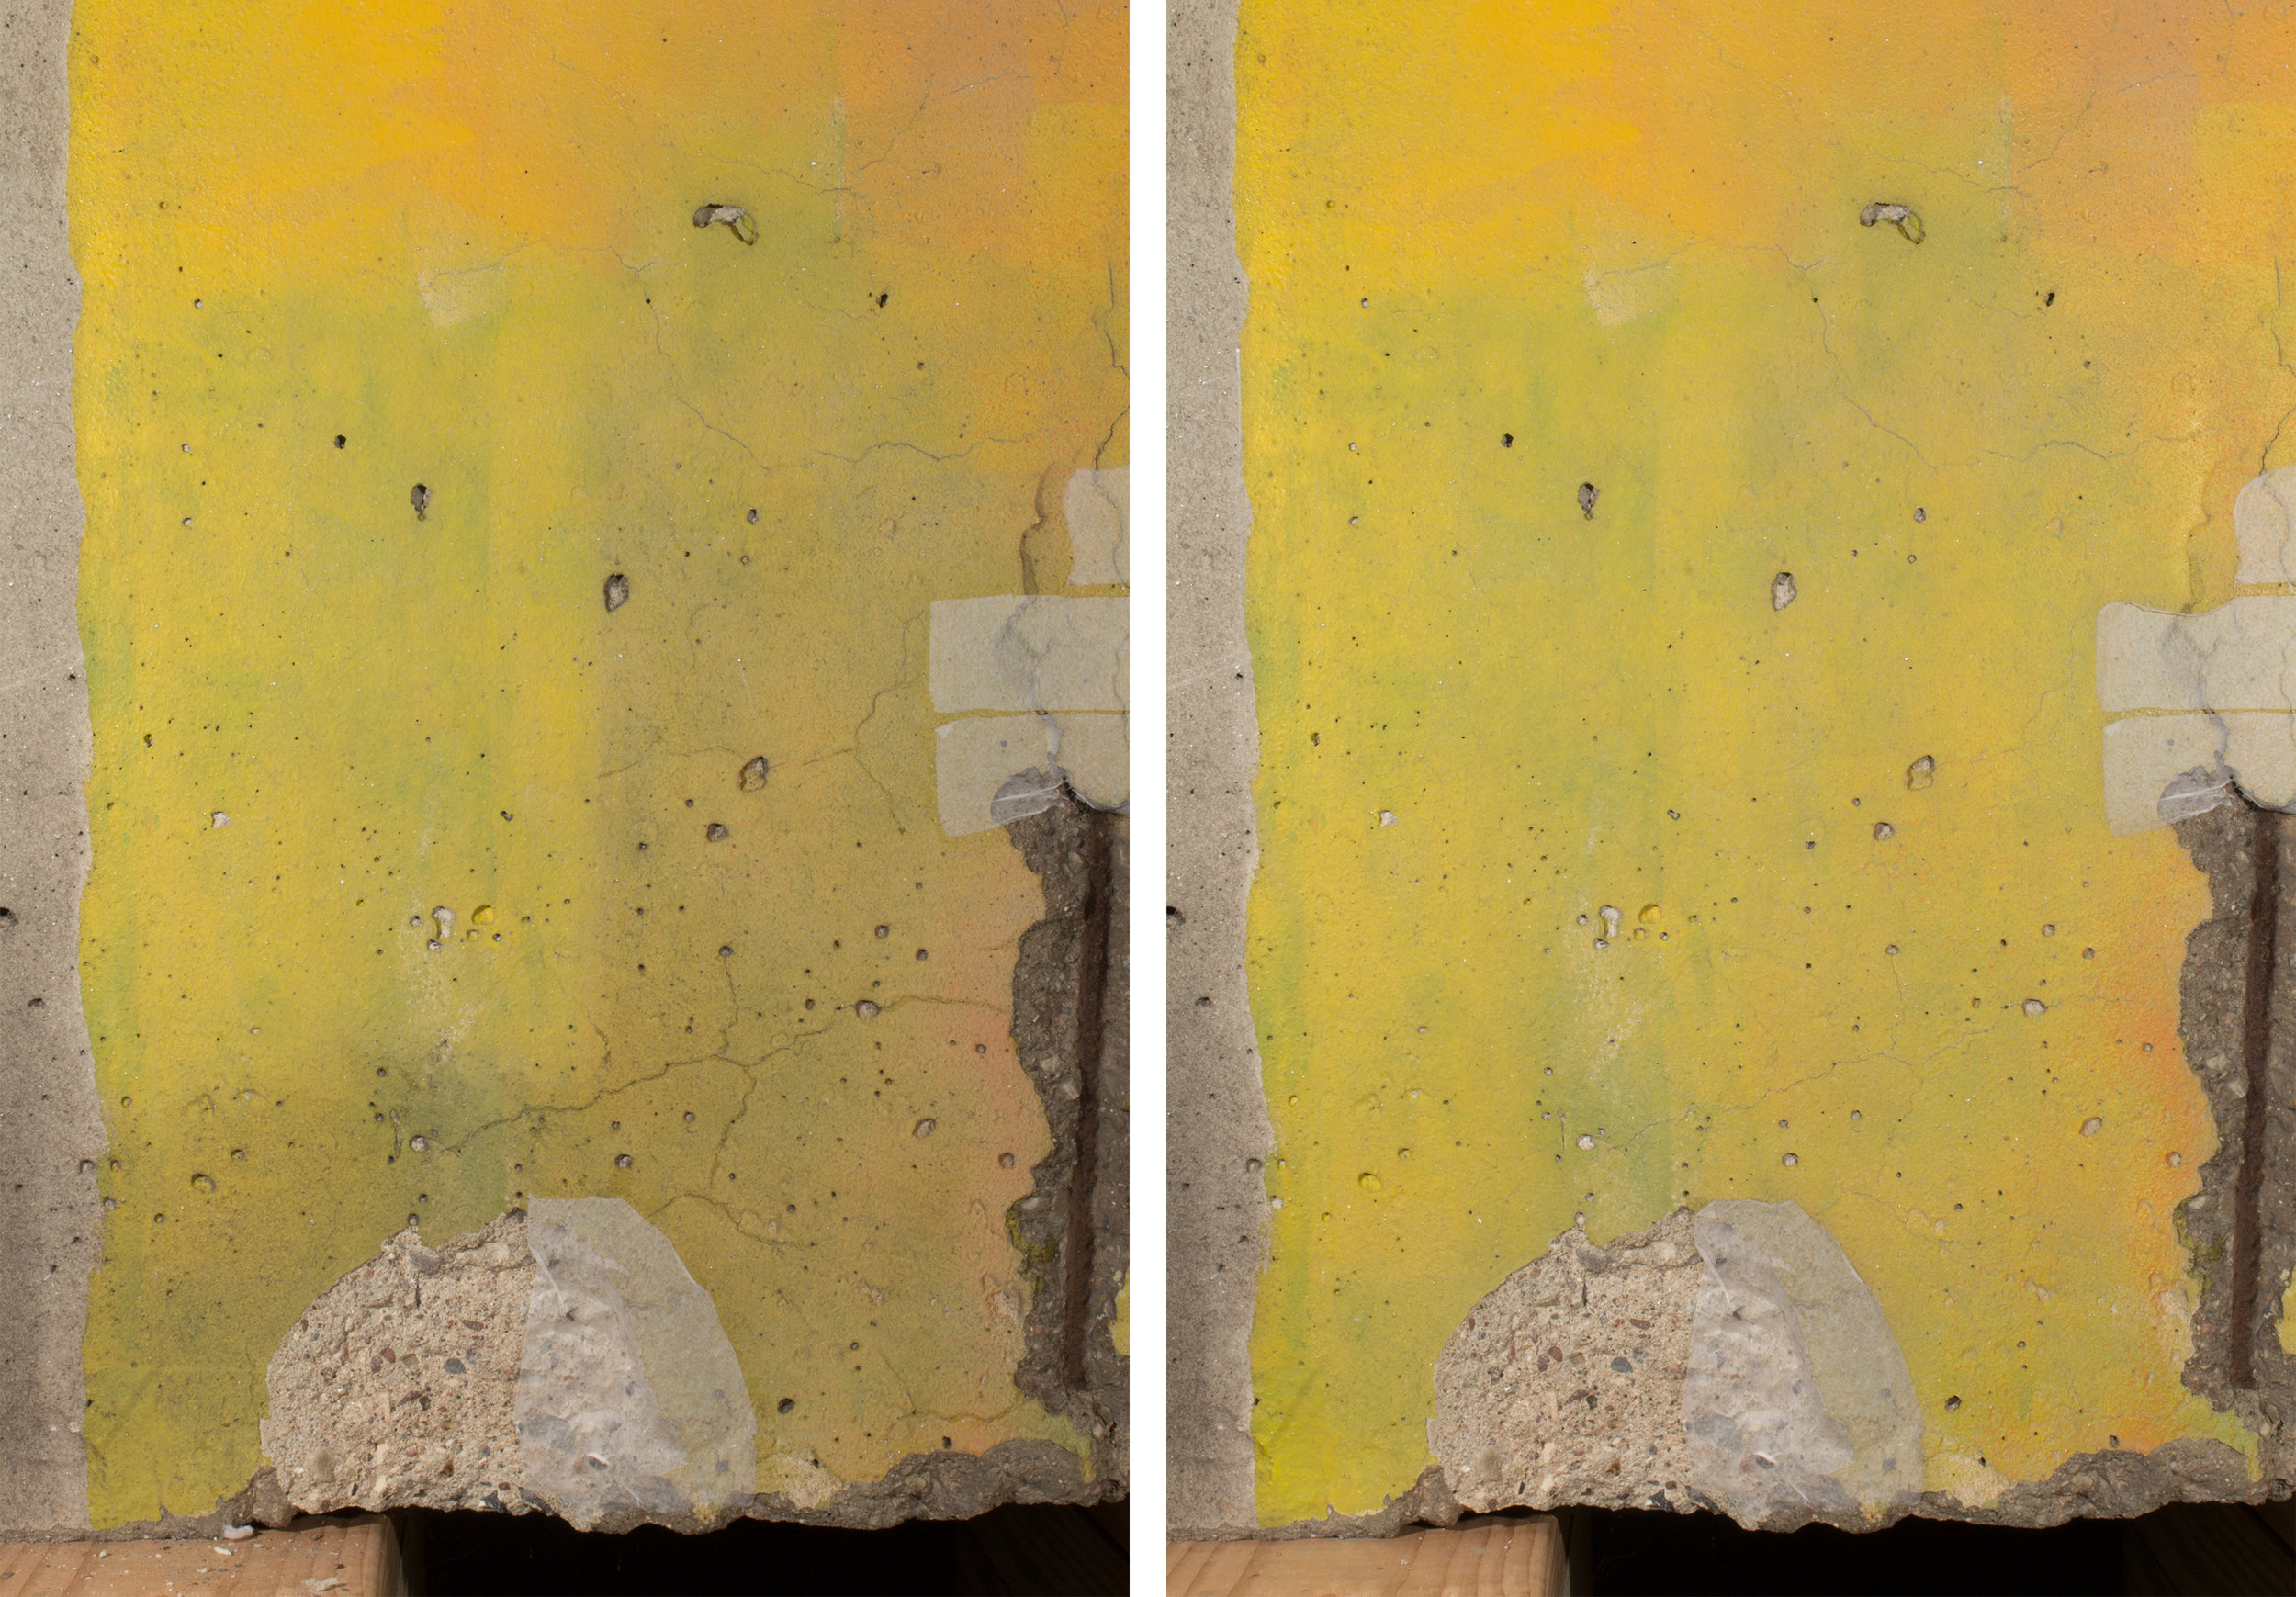  Results of surface cleaning. Before (left), After (right).&nbsp;  Image   
  
 
  
    
  
 Normal 
 0 
 
 
 
 
 false 
 false 
 false 
 
 EN-US 
 JA 
 X-NONE 
 
  
  
  
  
  
  
  
  
  
  
 
 
  
  
  
  
  
  
  
  
  
  
  
  
    
  
 
 
 
 
 